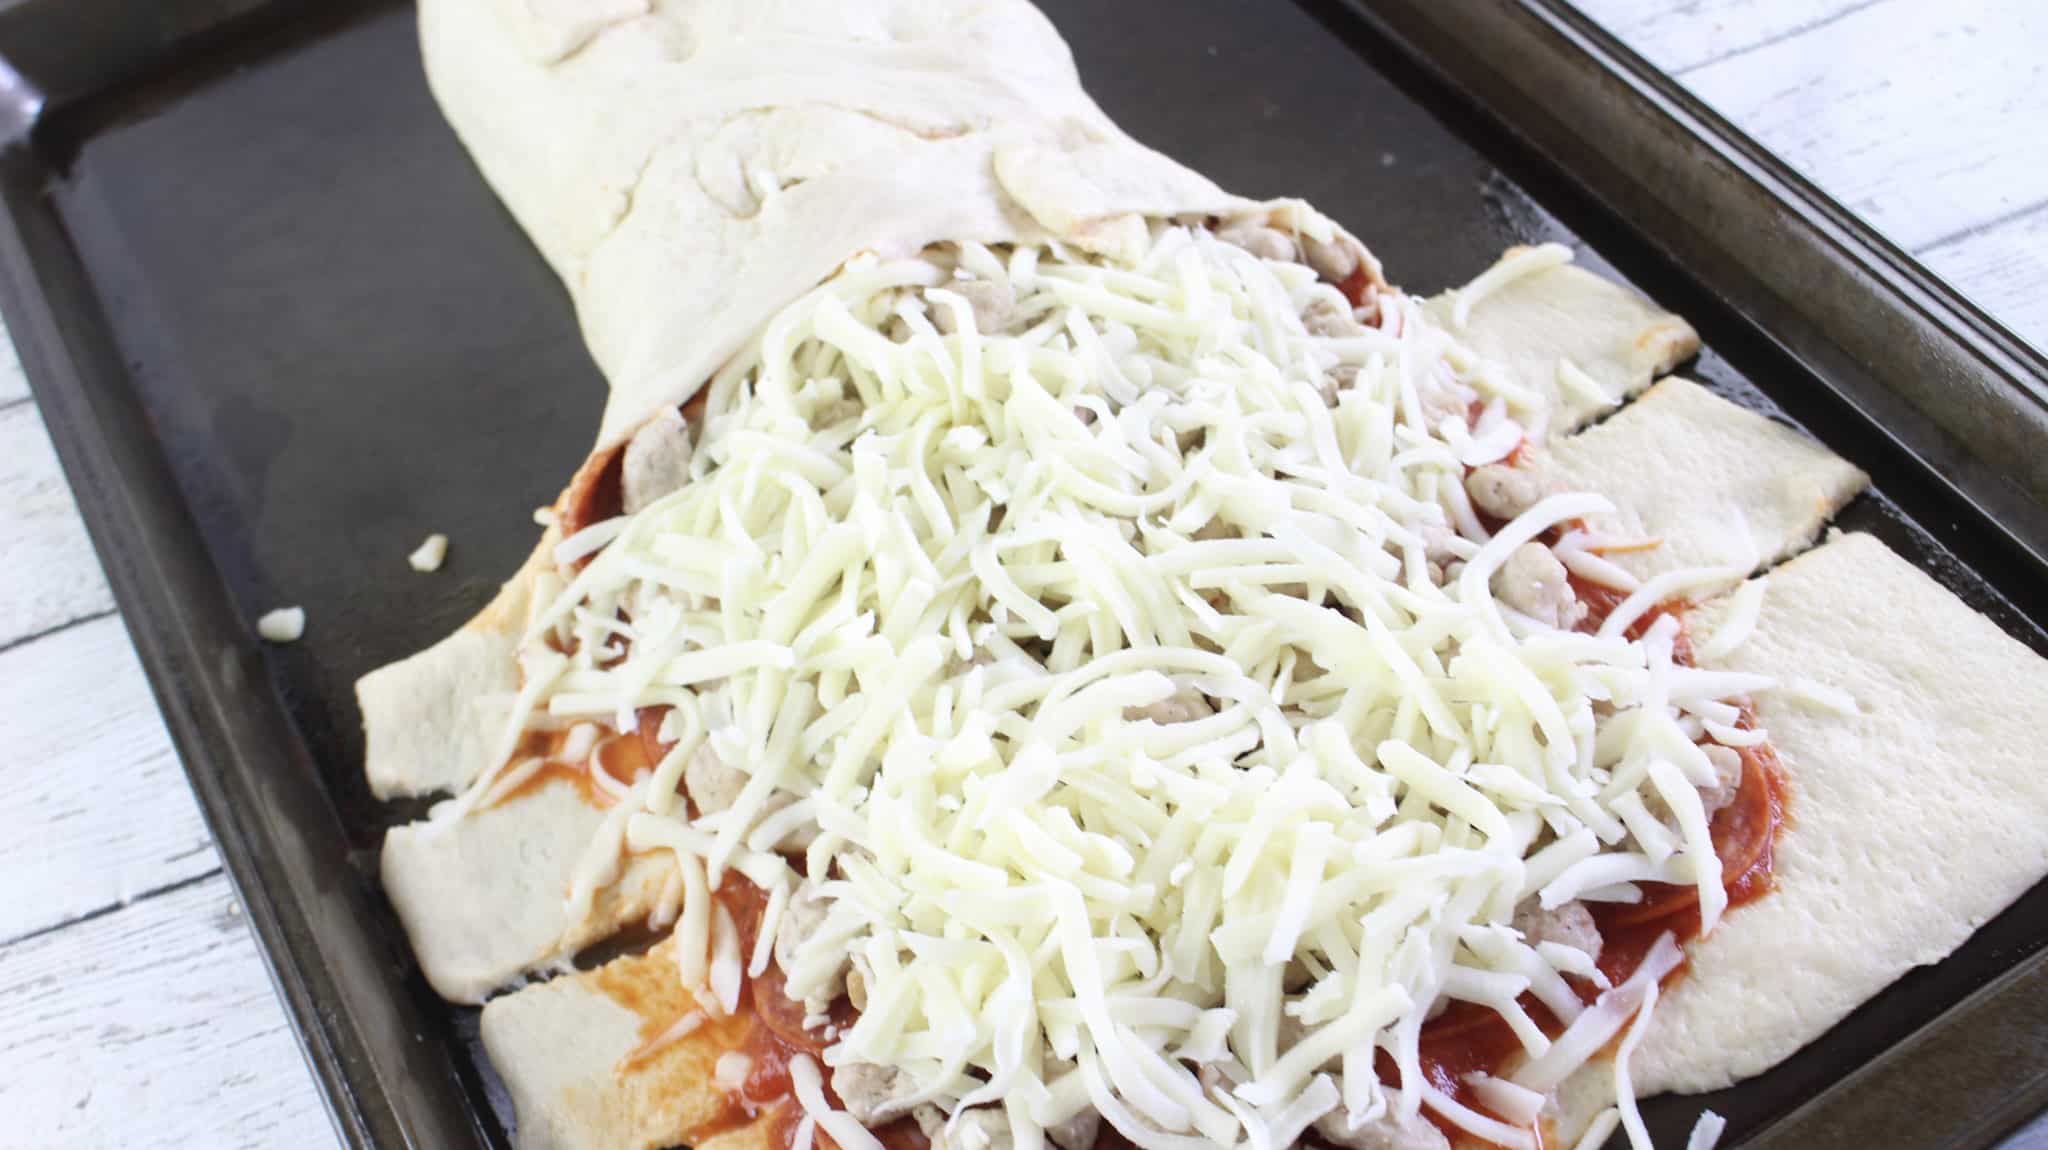 braiding pizza dough over the filling.